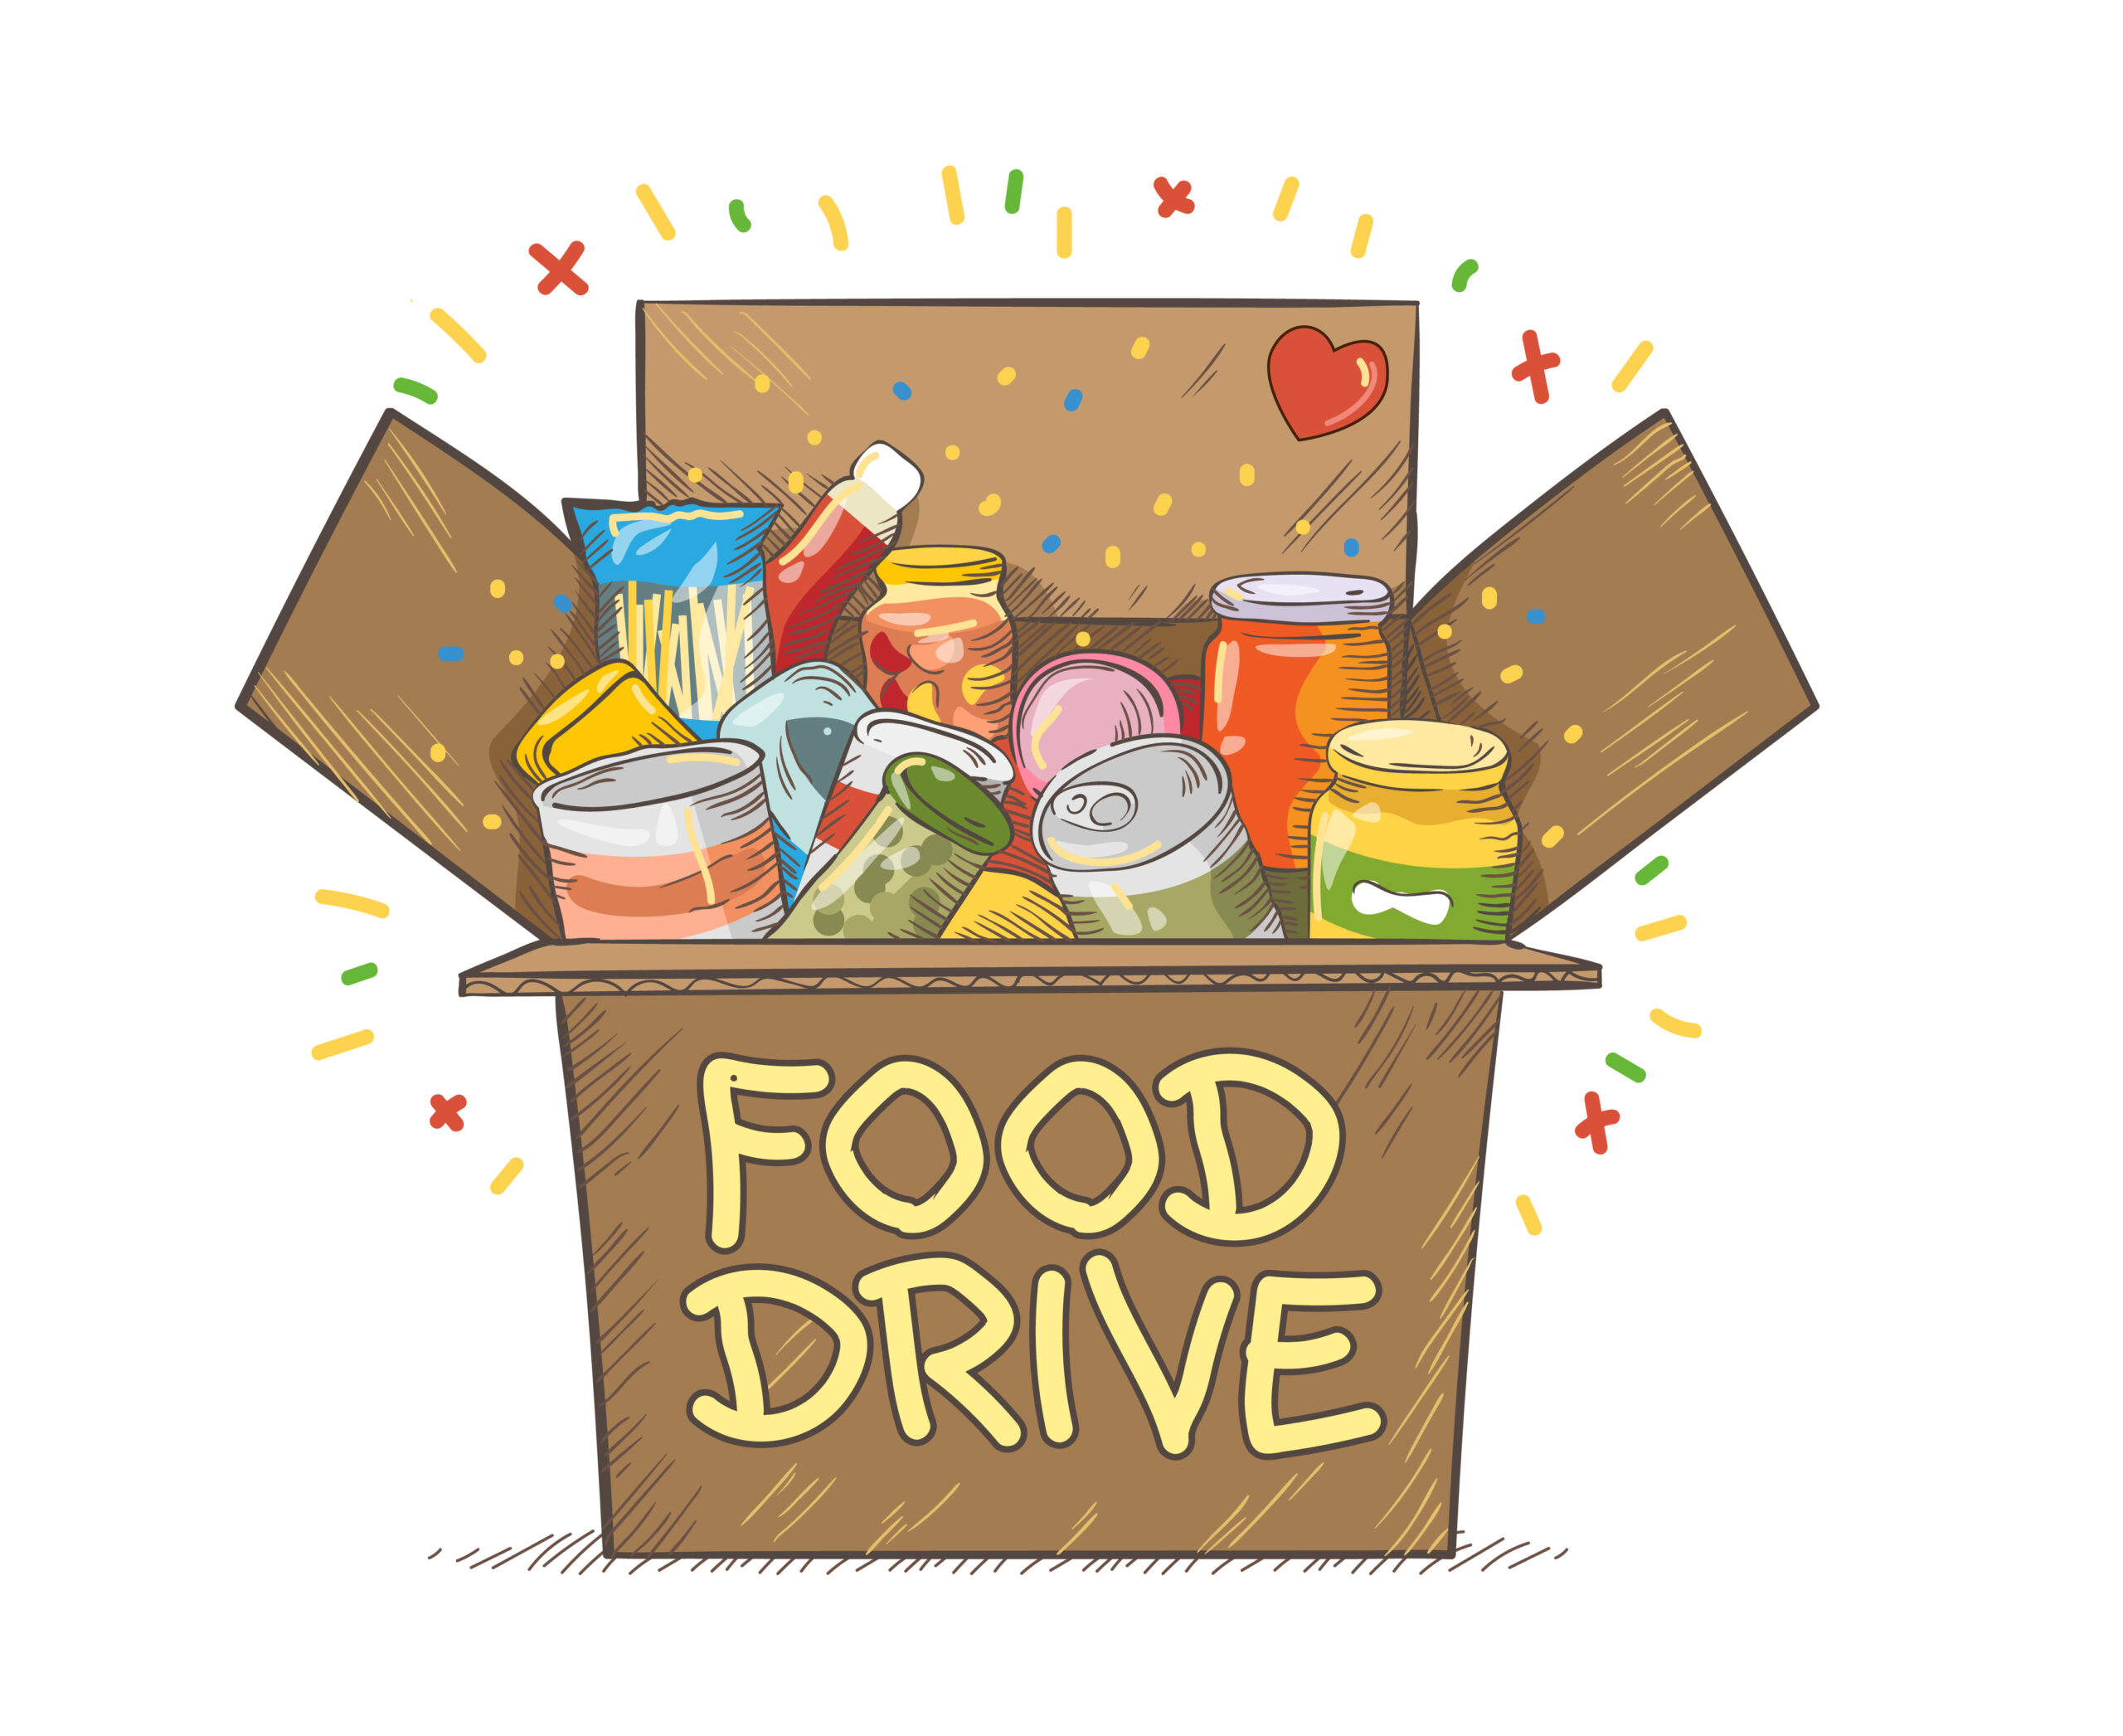 Cartoon image of a cardboard box filled with food and labeled food drive